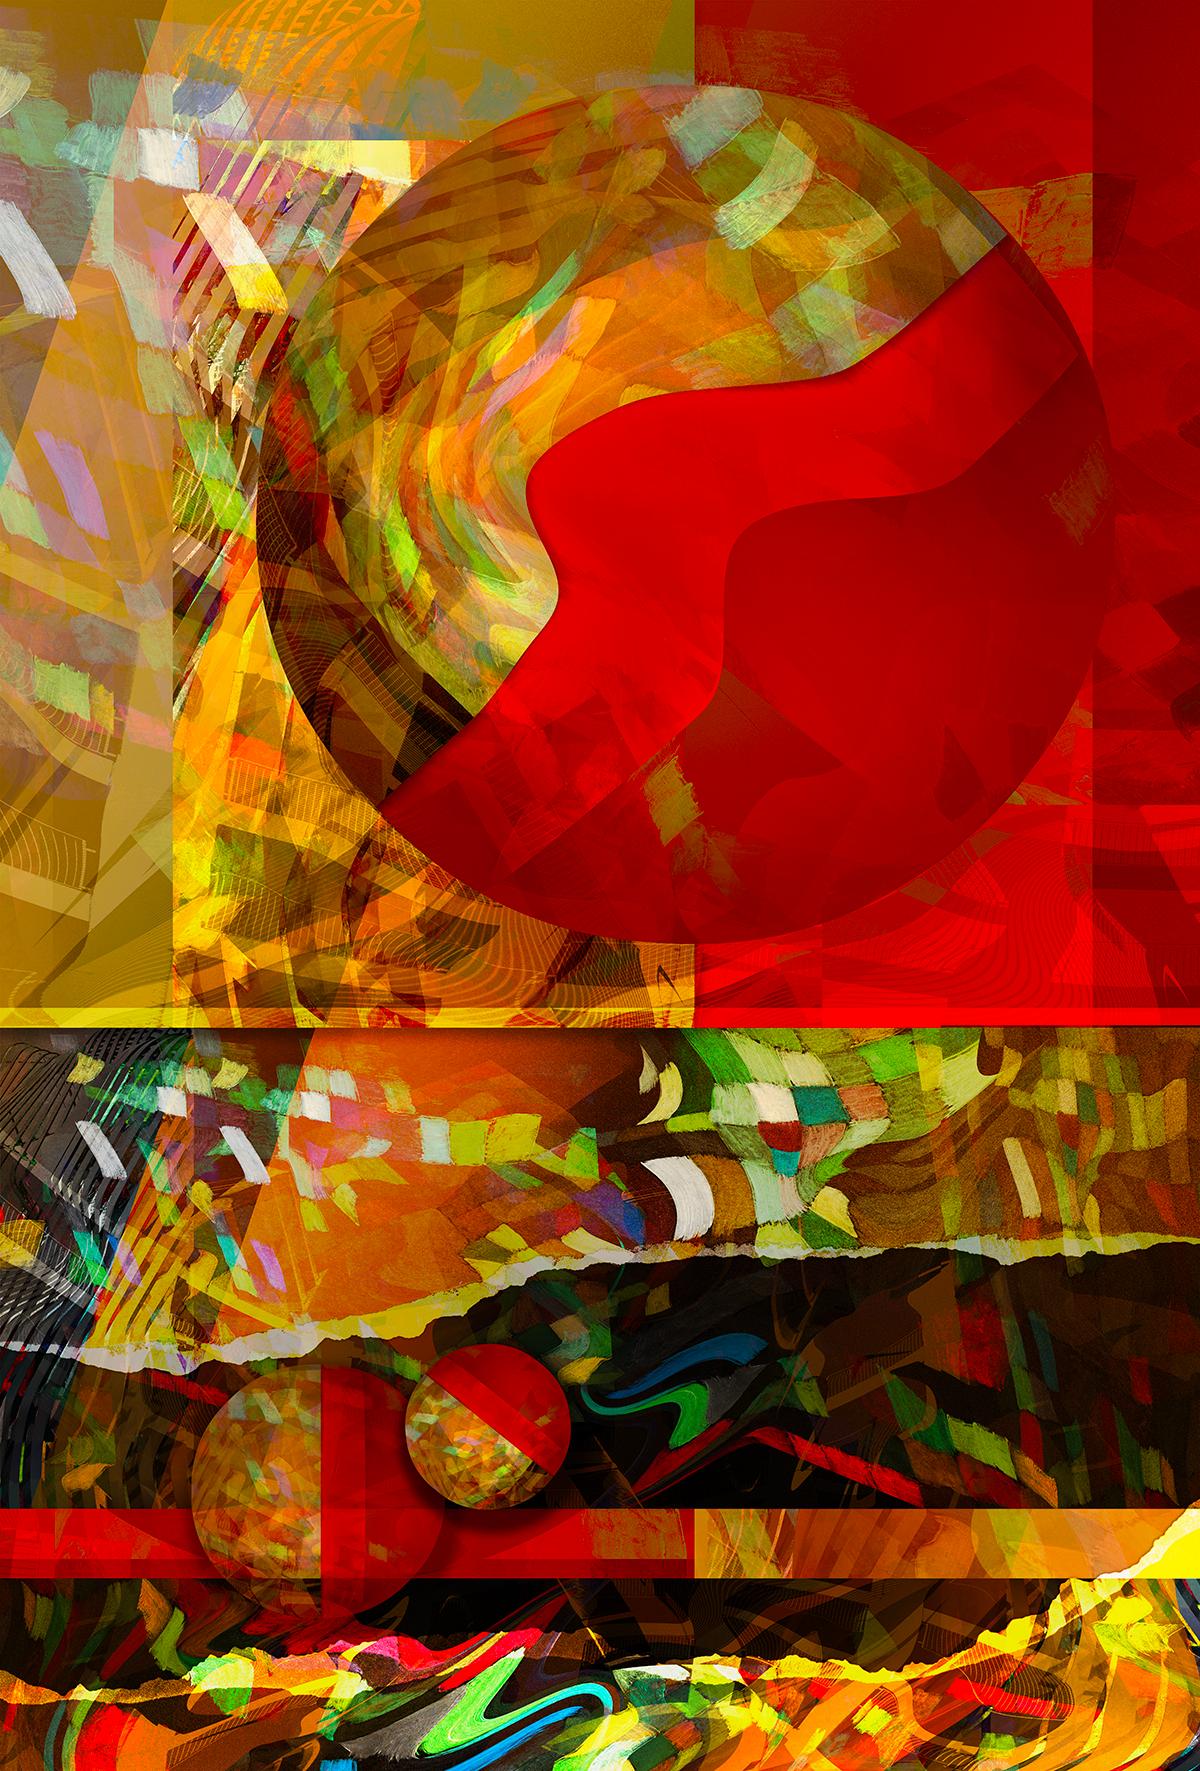 Marvin Berk Abstract Print - "Geometric Sphere #6" - Vertical colorful digital photomontage in red and gold.